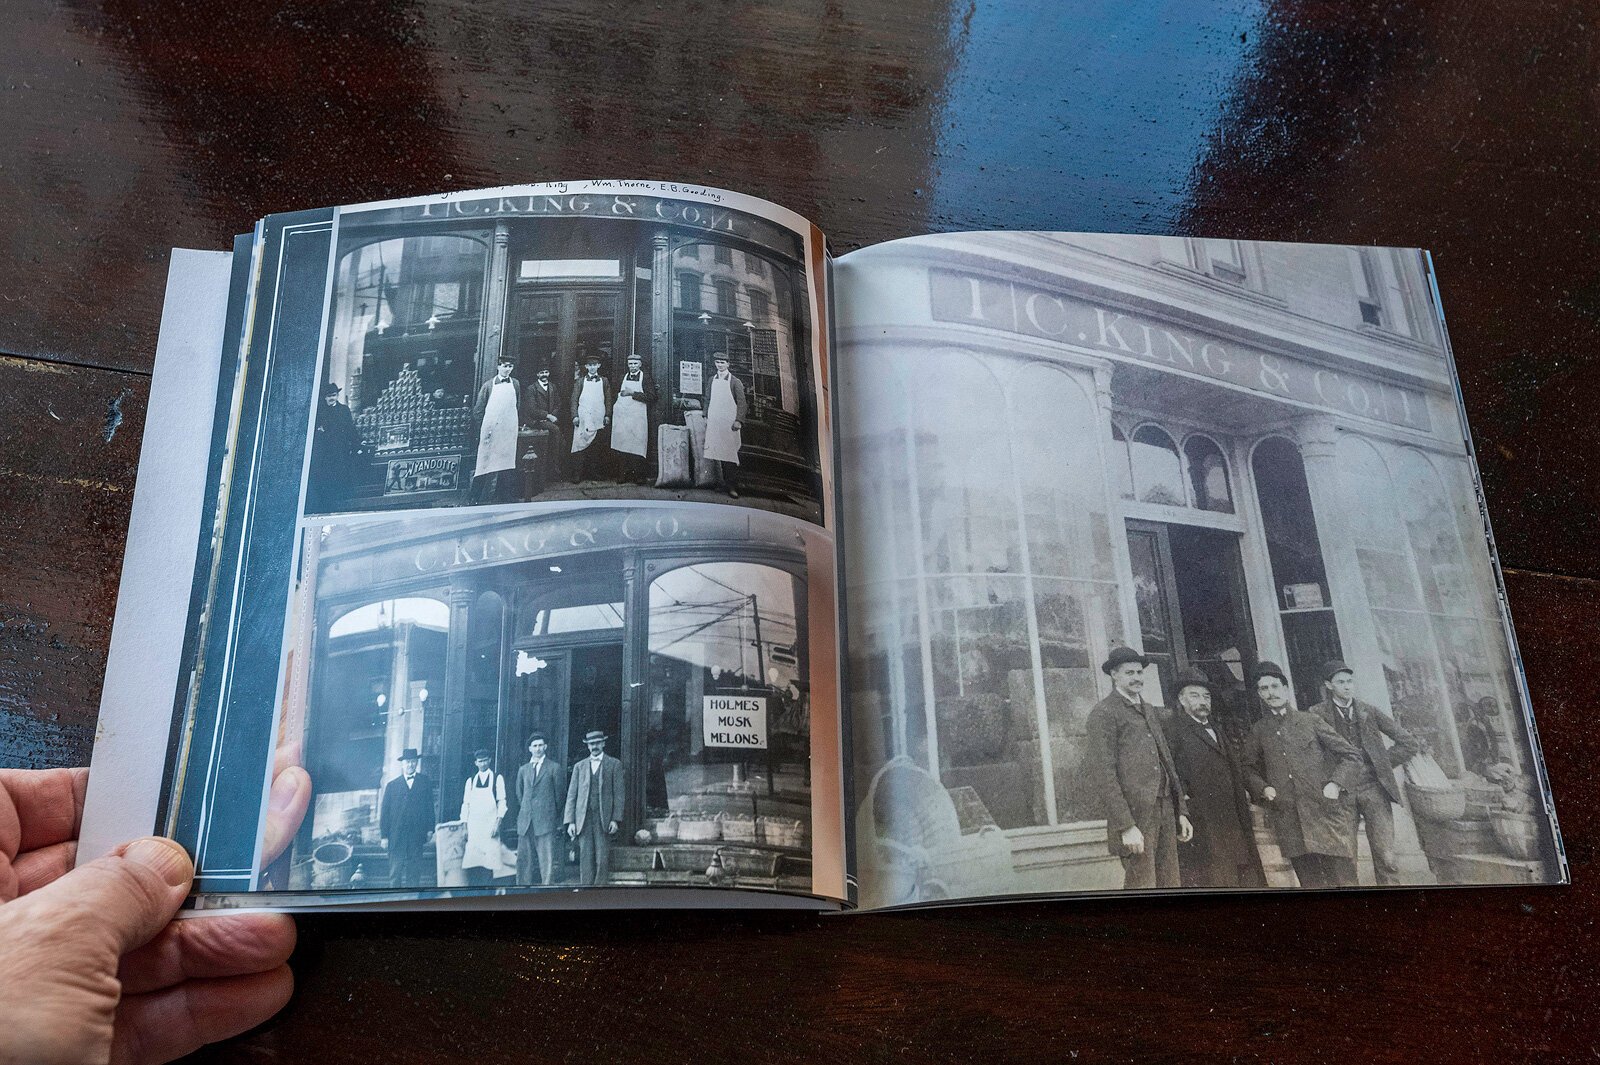 A book of historic photos from the C. King & Co. Cafe building.